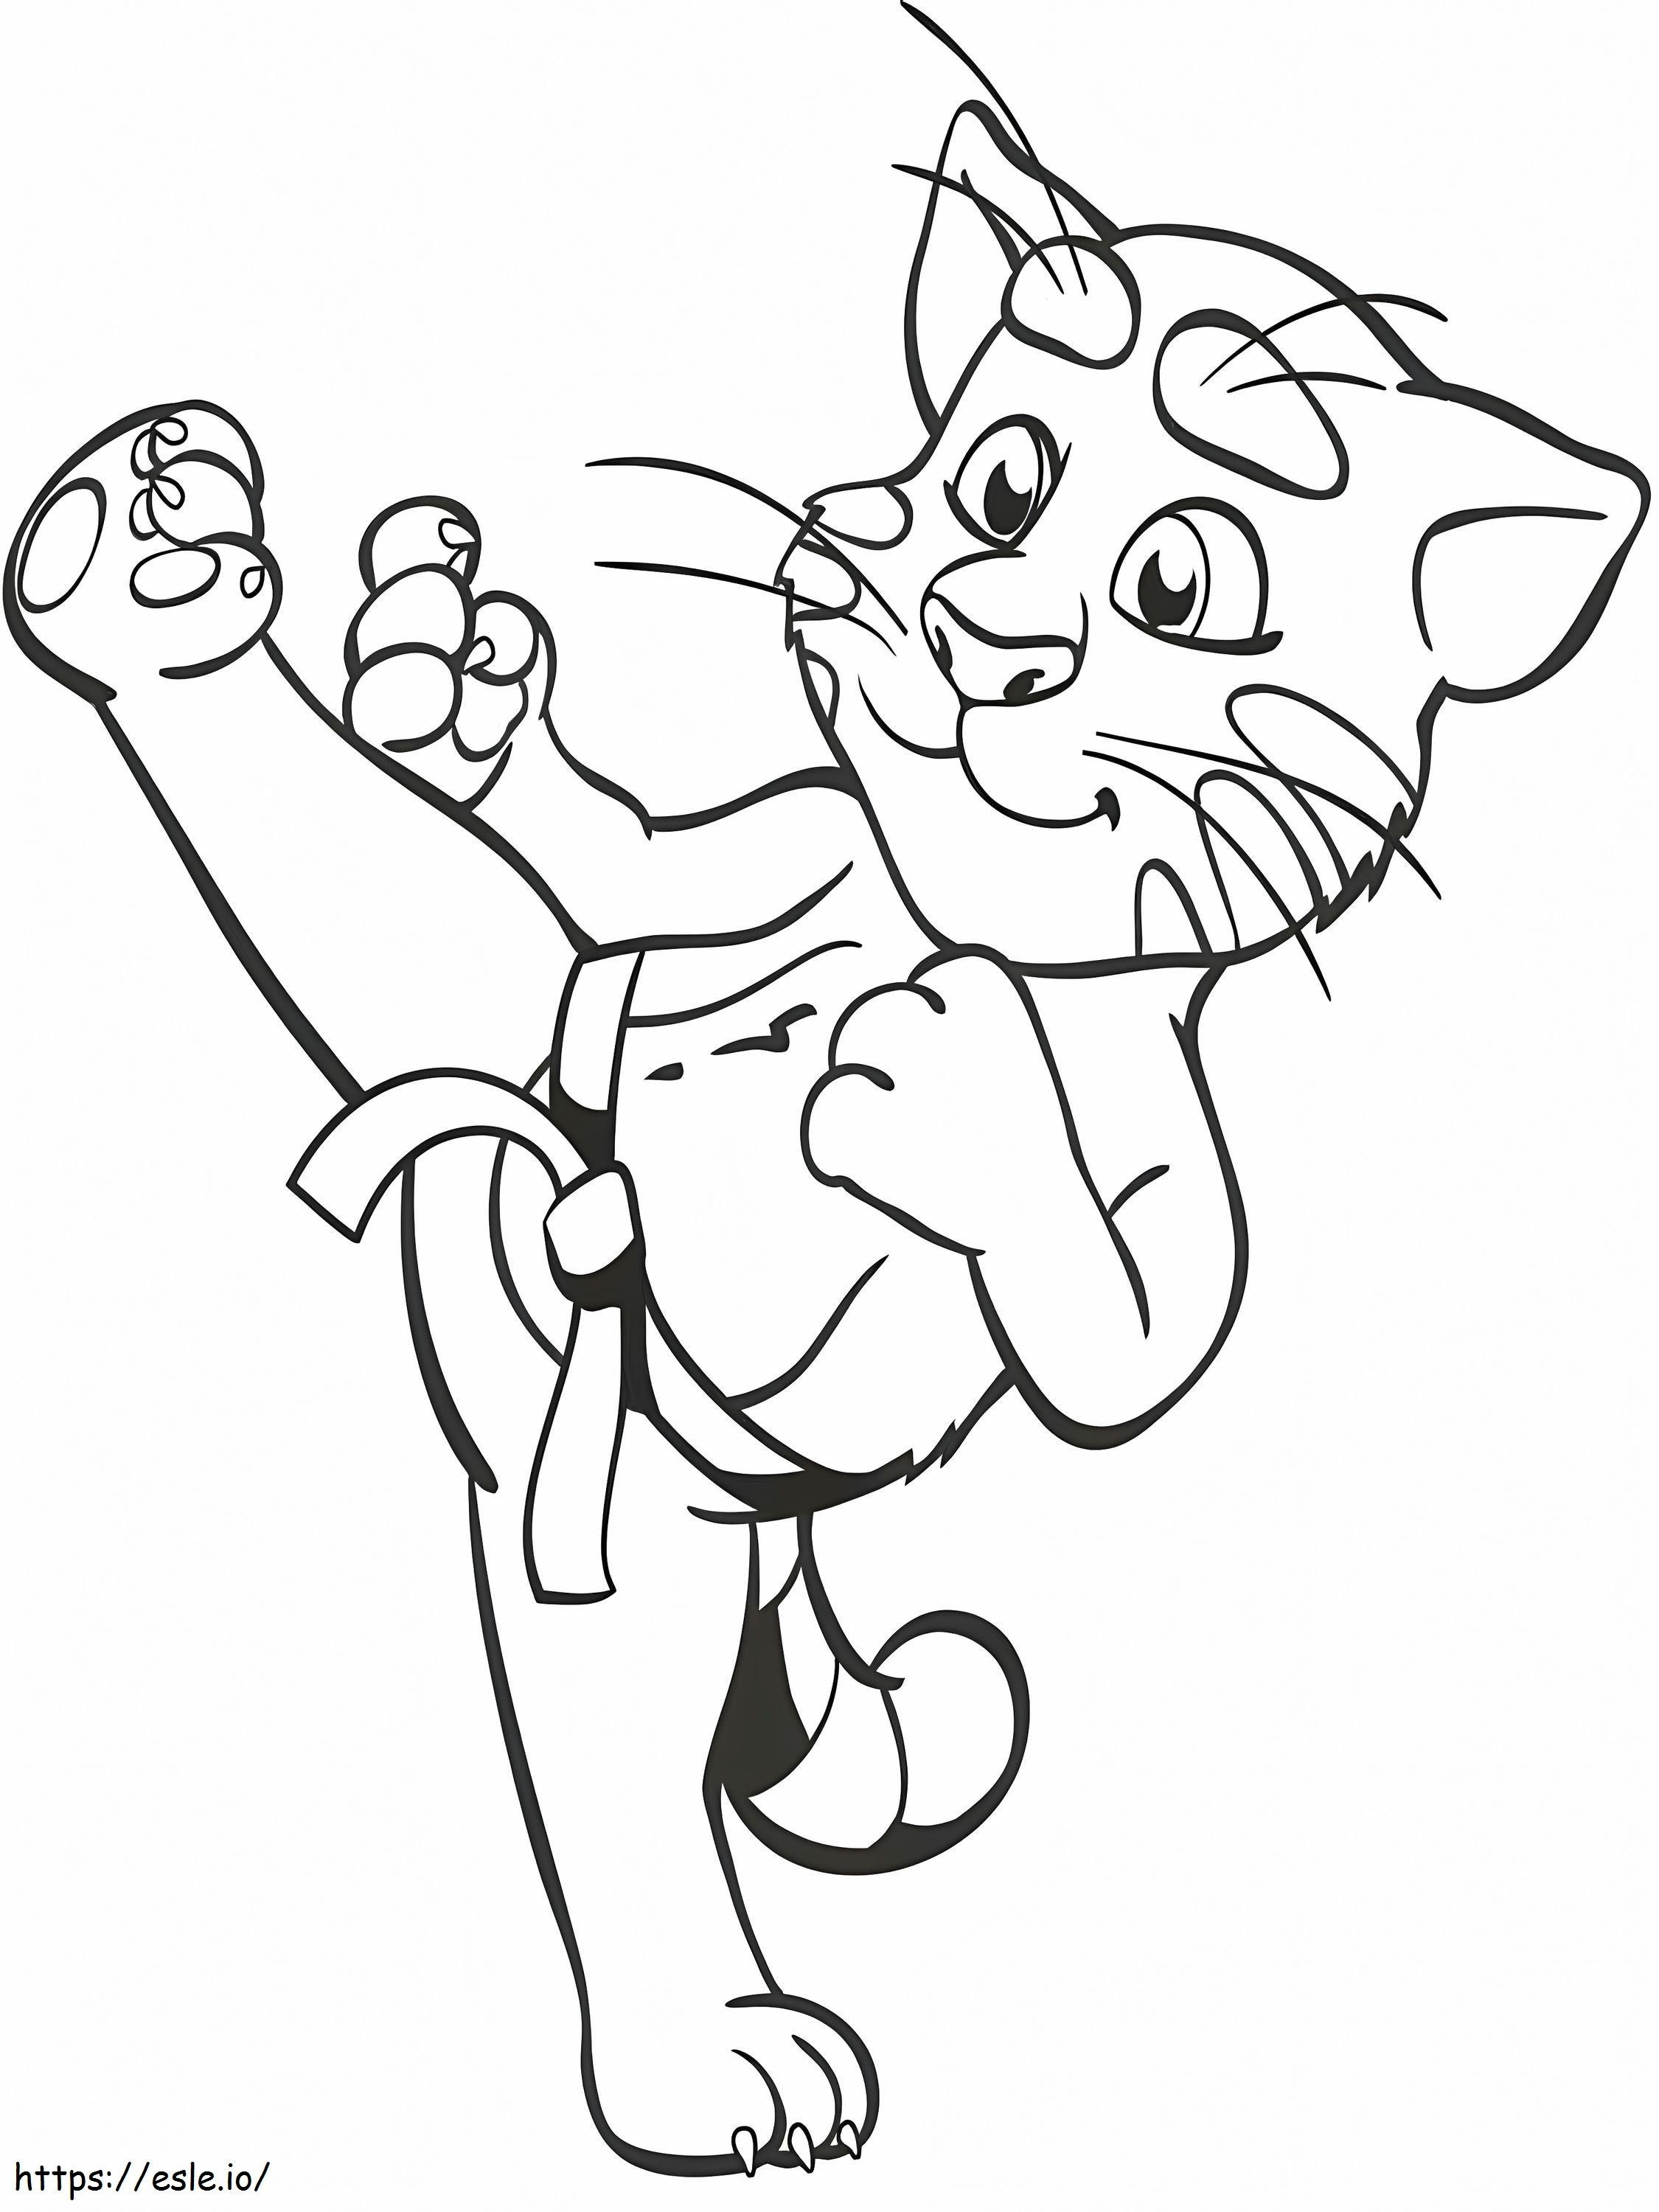 1528854692 Toma4 coloring page